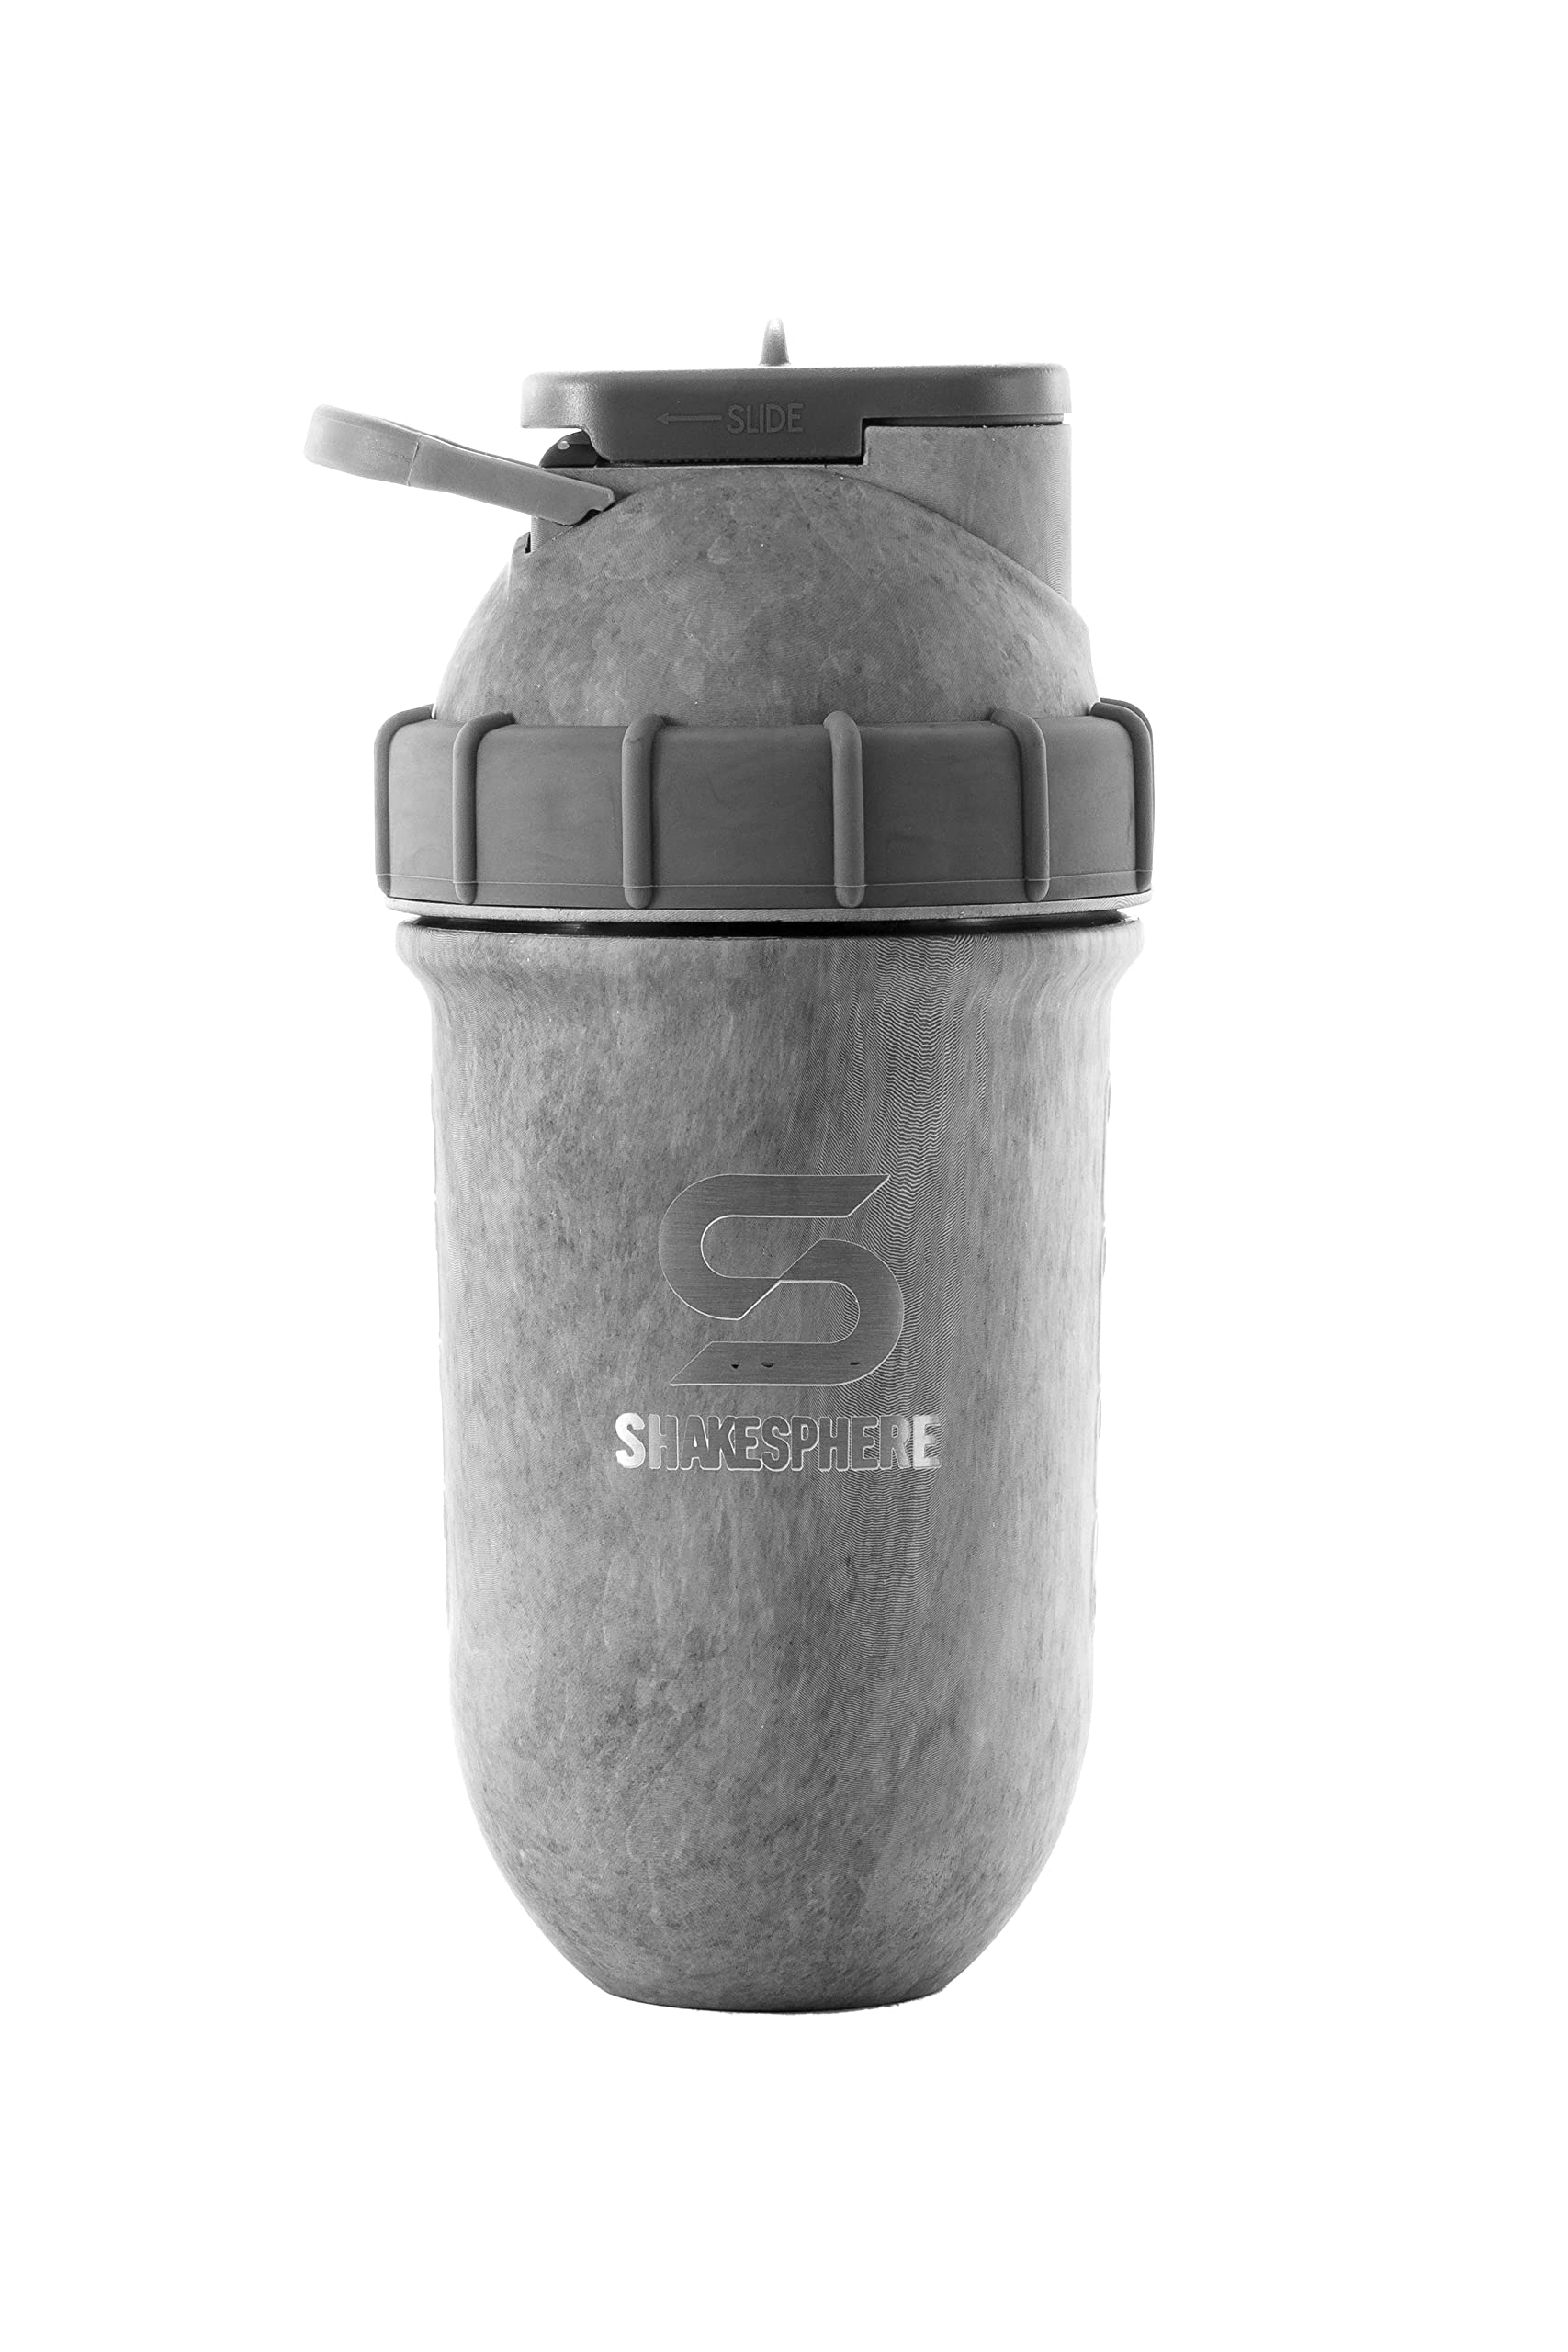 SHAKESPHERE Tumbler STEEL: Protein Shaker Bottle Keeps Hot Drinks HOT &  Cold Drinks COLD 24 oz. No Blending Ball or Whisk Needed Easy Clean Up  Great for Shakes Smoothies Concrete